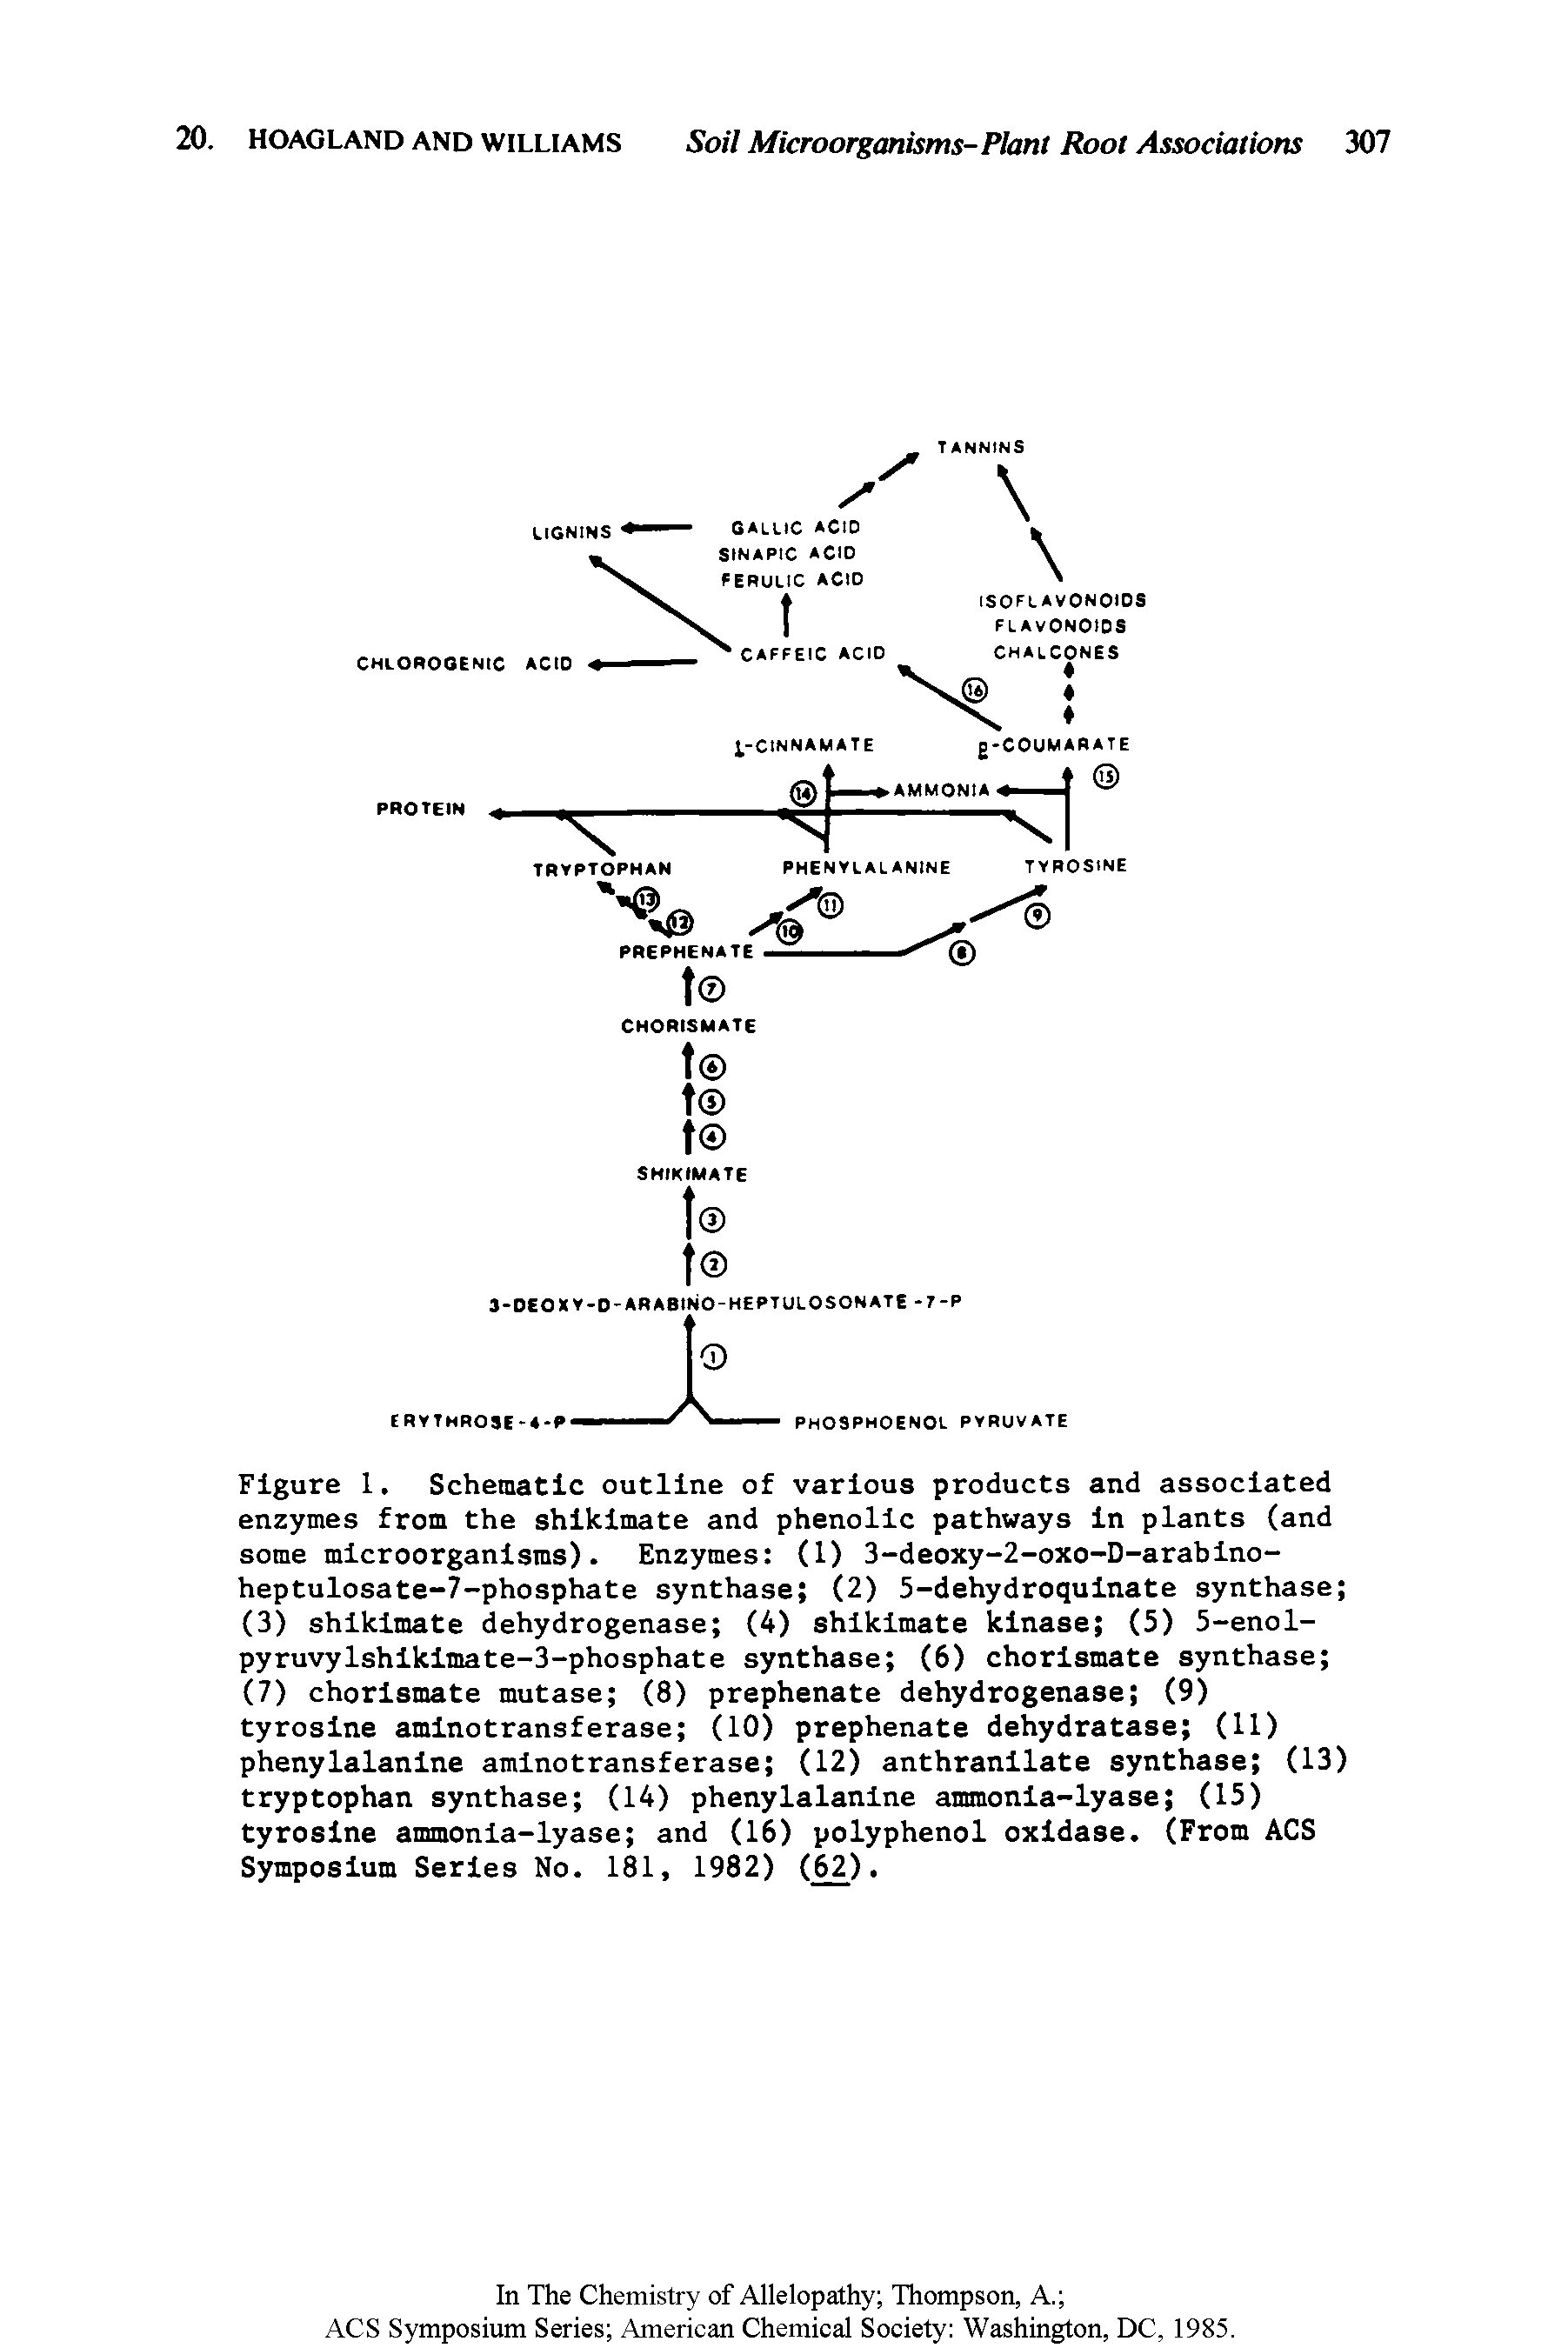 Figure 1. Schematic outline of various products and associated enzymes from the shikimate and phenolic pathways in plants (and some microorganisms). Enzymes (1) 3-deoxy-2-oxo-D-arabino-heptulosate-7-phosphate synthase (2) 5-dehydroquinate synthase (3) shikimate dehydrogenase (4) shikimate kinase (5) 5-enol-pyruvylshikimate-3-phosphate synthase (6) chorismate synthase (7) chorismate mutase (8) prephenate dehydrogenase (9) tyrosine aminotransferase (10) prephenate dehydratase (11) phenylalanine aminotransferase (12) anthranilate synthase (13) tryptophan synthase (14) phenylalanine ammonia-lyase (15) tyrosine ammonia-lyase and (16) polyphenol oxidase. (From ACS Symposium Series No. 181, 1982) (62).